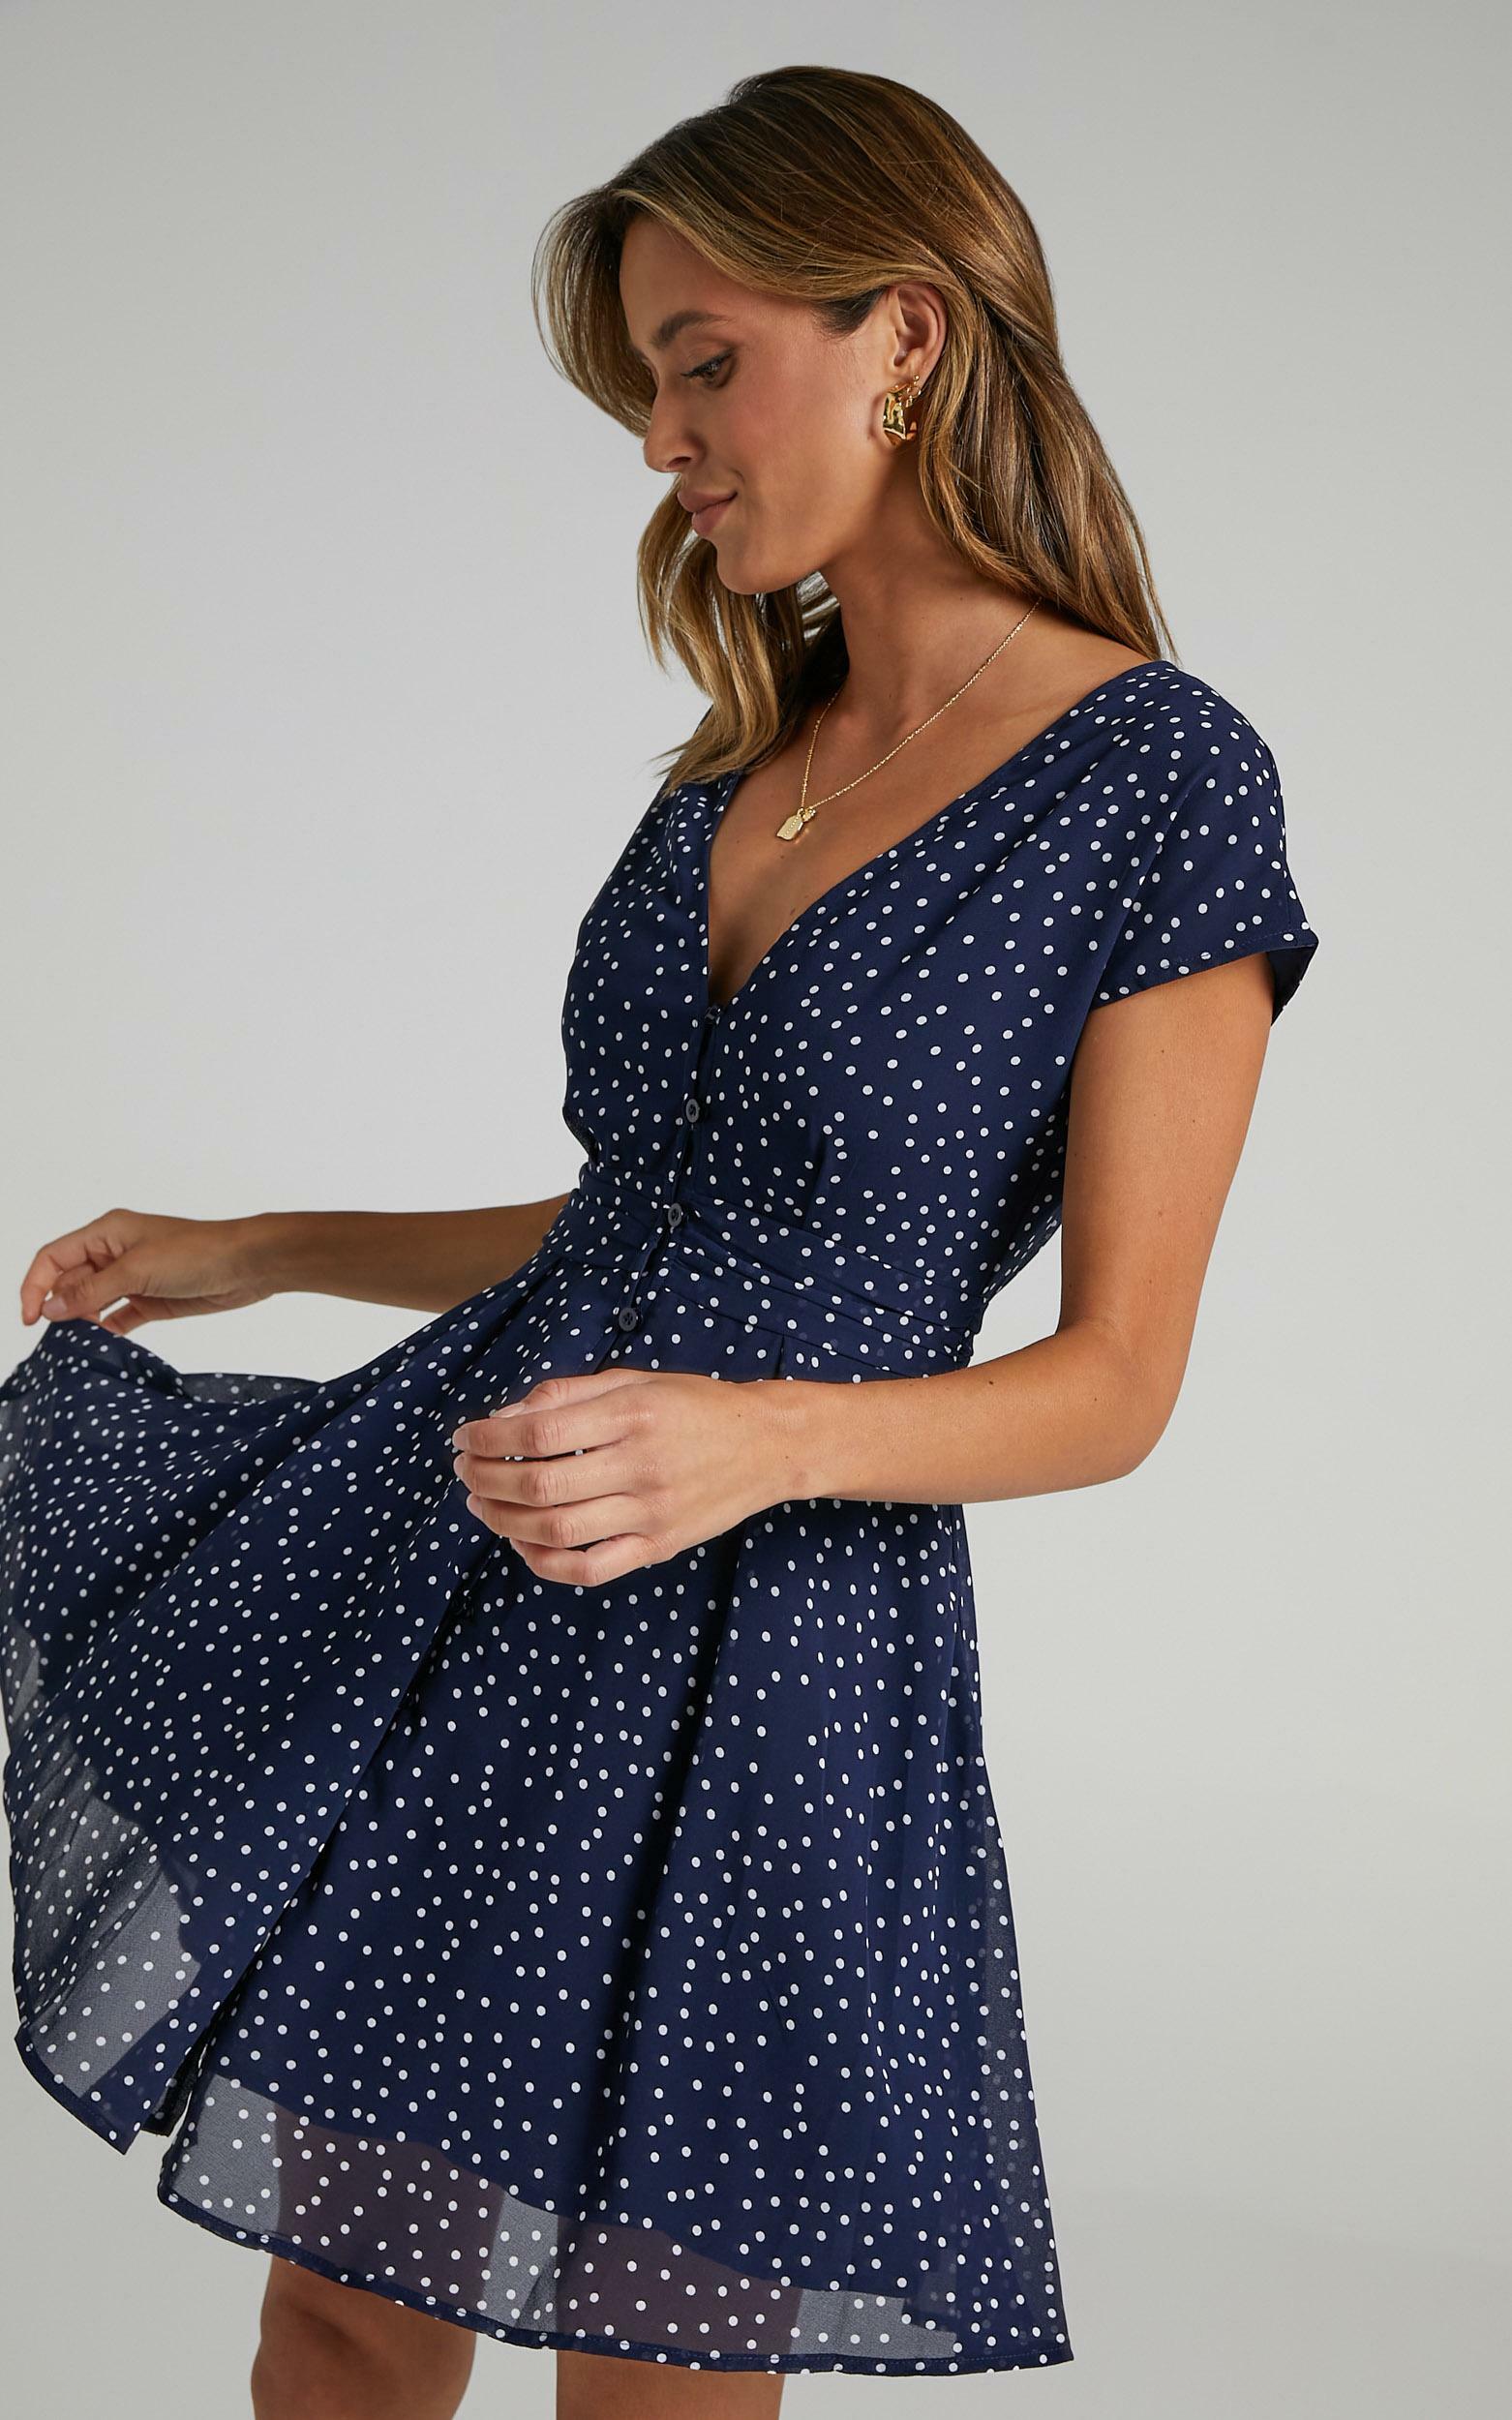 Hey Now A-line Mini Dress in Navy Spot - 20, NVY1, hi-res image number null